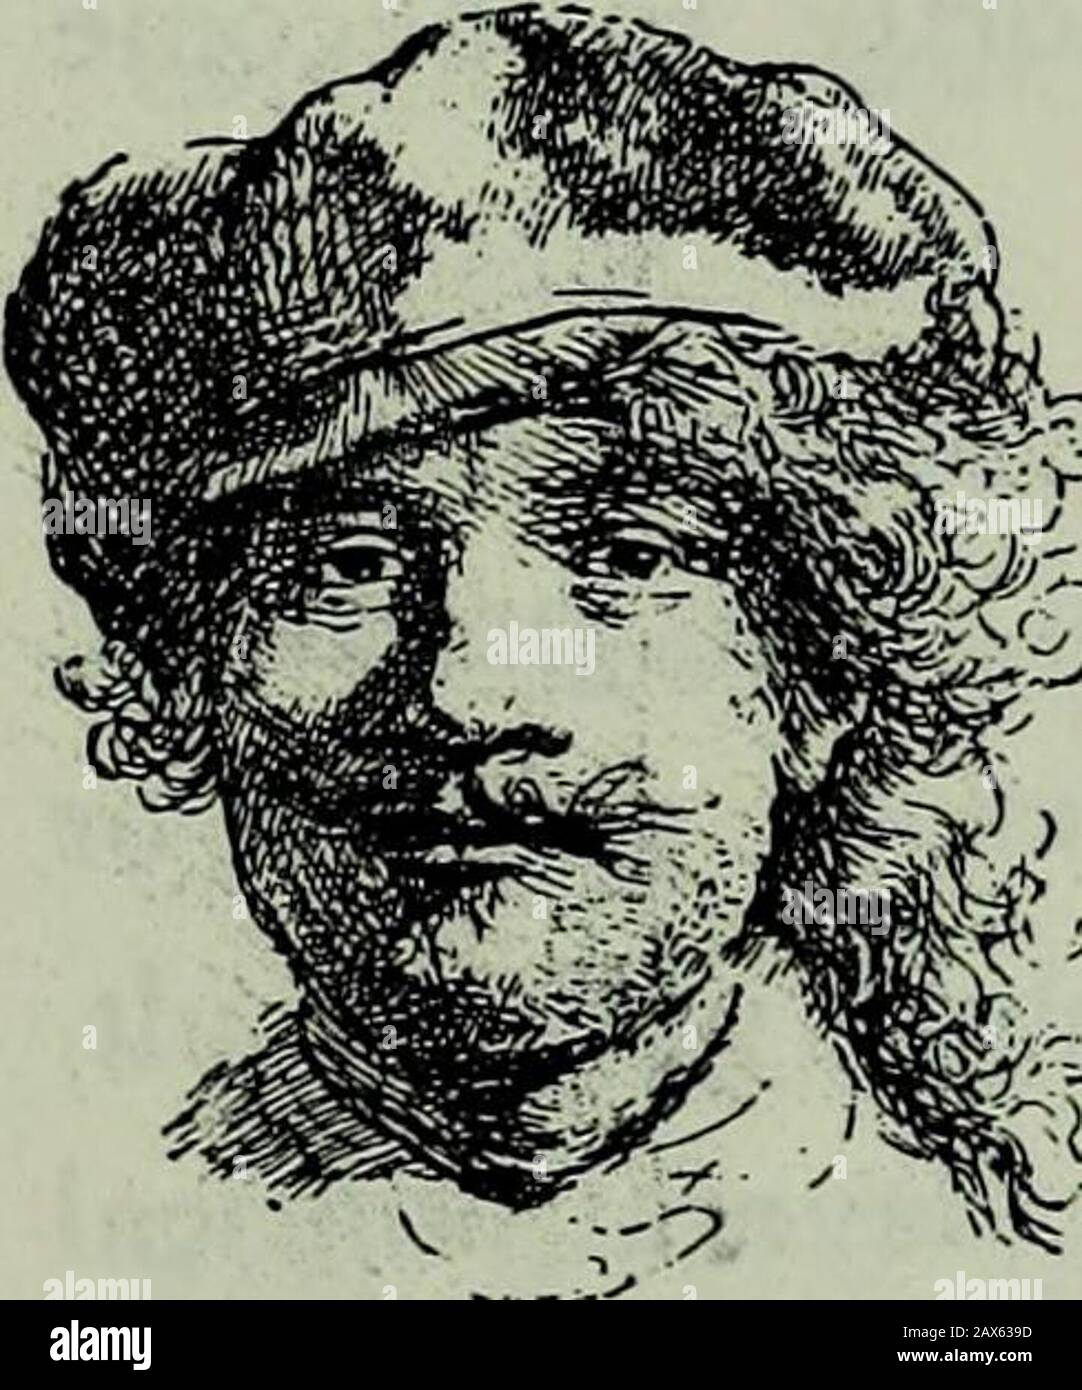 Rembrandt, his life, his work and his time . PEN DRAWING, HEIGHTENED WITH SEPIA. (Heseltine Collection.) CHAPTER IX. SASKIA VAN UYLENBORCH AND HER FAMILY—REMBRANDT S PORTRAITS OF HER THE JEWISH BRIDE REMBRANDT MARRIES SASKIA (jUNE 22, 1634)—STUDIES AND PICTURES PAINTED FROM HER : THE ARTEMISIA IN THE PRADO, THEBURGOMASTER PANCRAS AND HIS WIFE, THE REMBRANDT AND SASKIA IN THEDRESDEN GALLERY—HIS INDUSTRY.. W E have seen how laborious were Rem-brandts first years at Amsterdam.But our long list of the works•p painted at this period is far from complete.To it we must add a number of drawings, andma Stock Photo